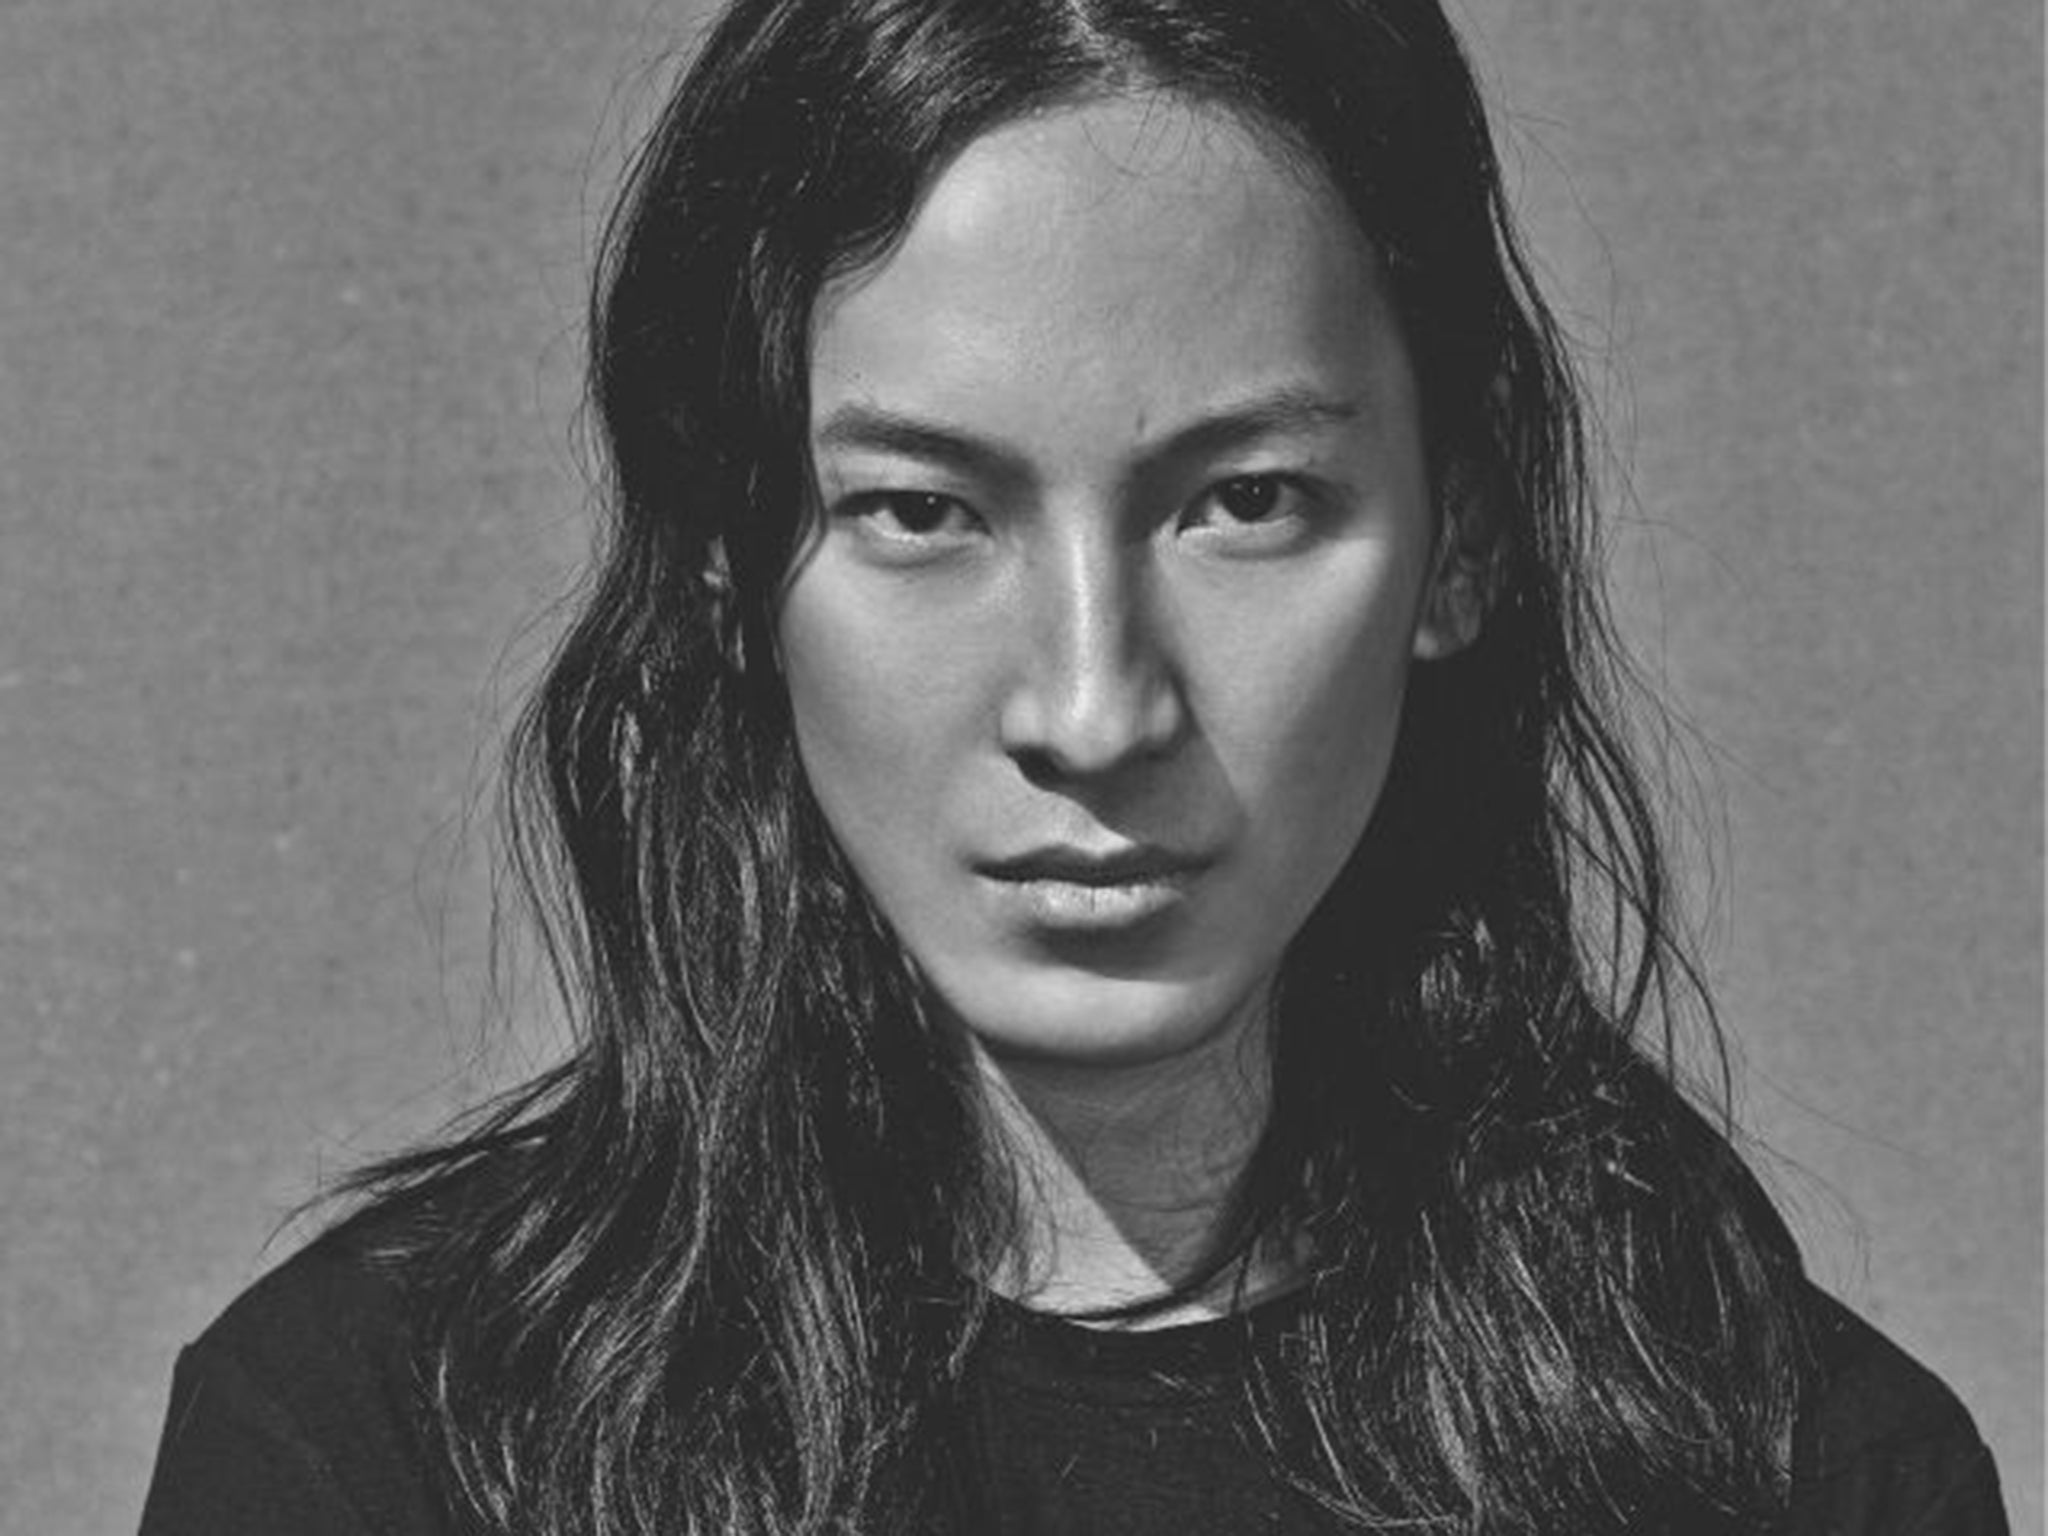 Alexander Wang's H&M Line Is Surprisingly Sporty